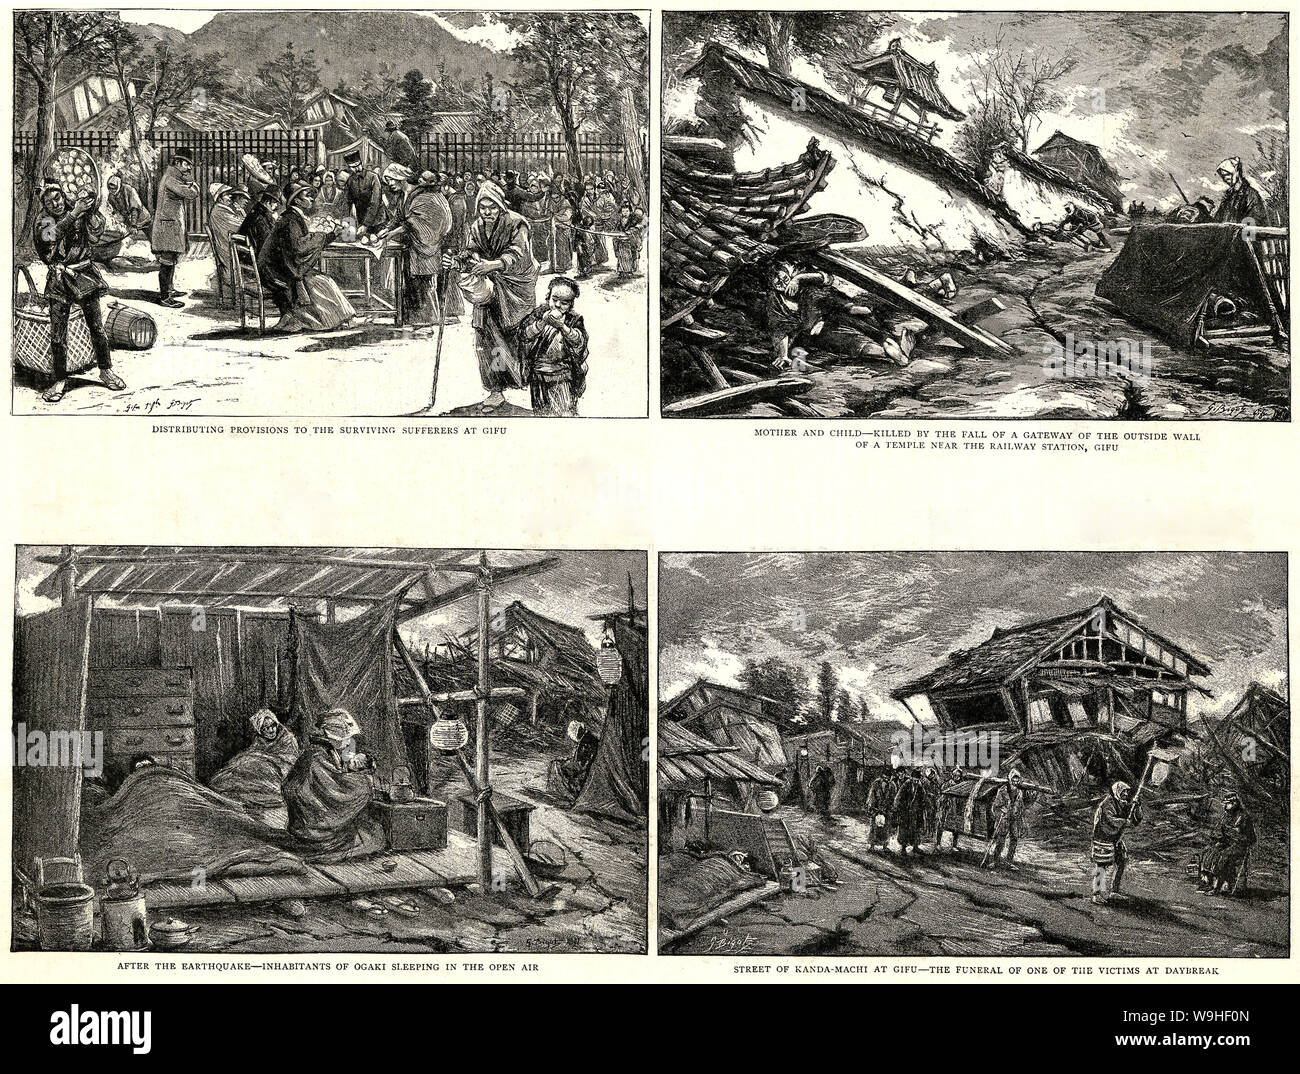 [ 1890s Japan - Nobi Earthquake, 1891 ] —   Devastation caused by the Nobi Earthquake (濃尾地震, Nobi Jishin) of October 28, 1891 (Meiji 24).  Published in the British weekly illustrated newspaper The Graphic on December 25, 1891 (Meiji  24).  The Nobi Earthquake measured between 8.0 and 8.4 on the scale of Richter and caused 7,273 deaths, 17,175 casualties and the destruction of 142,177 homes.  19th century vintage newspaper illustration. Stock Photo